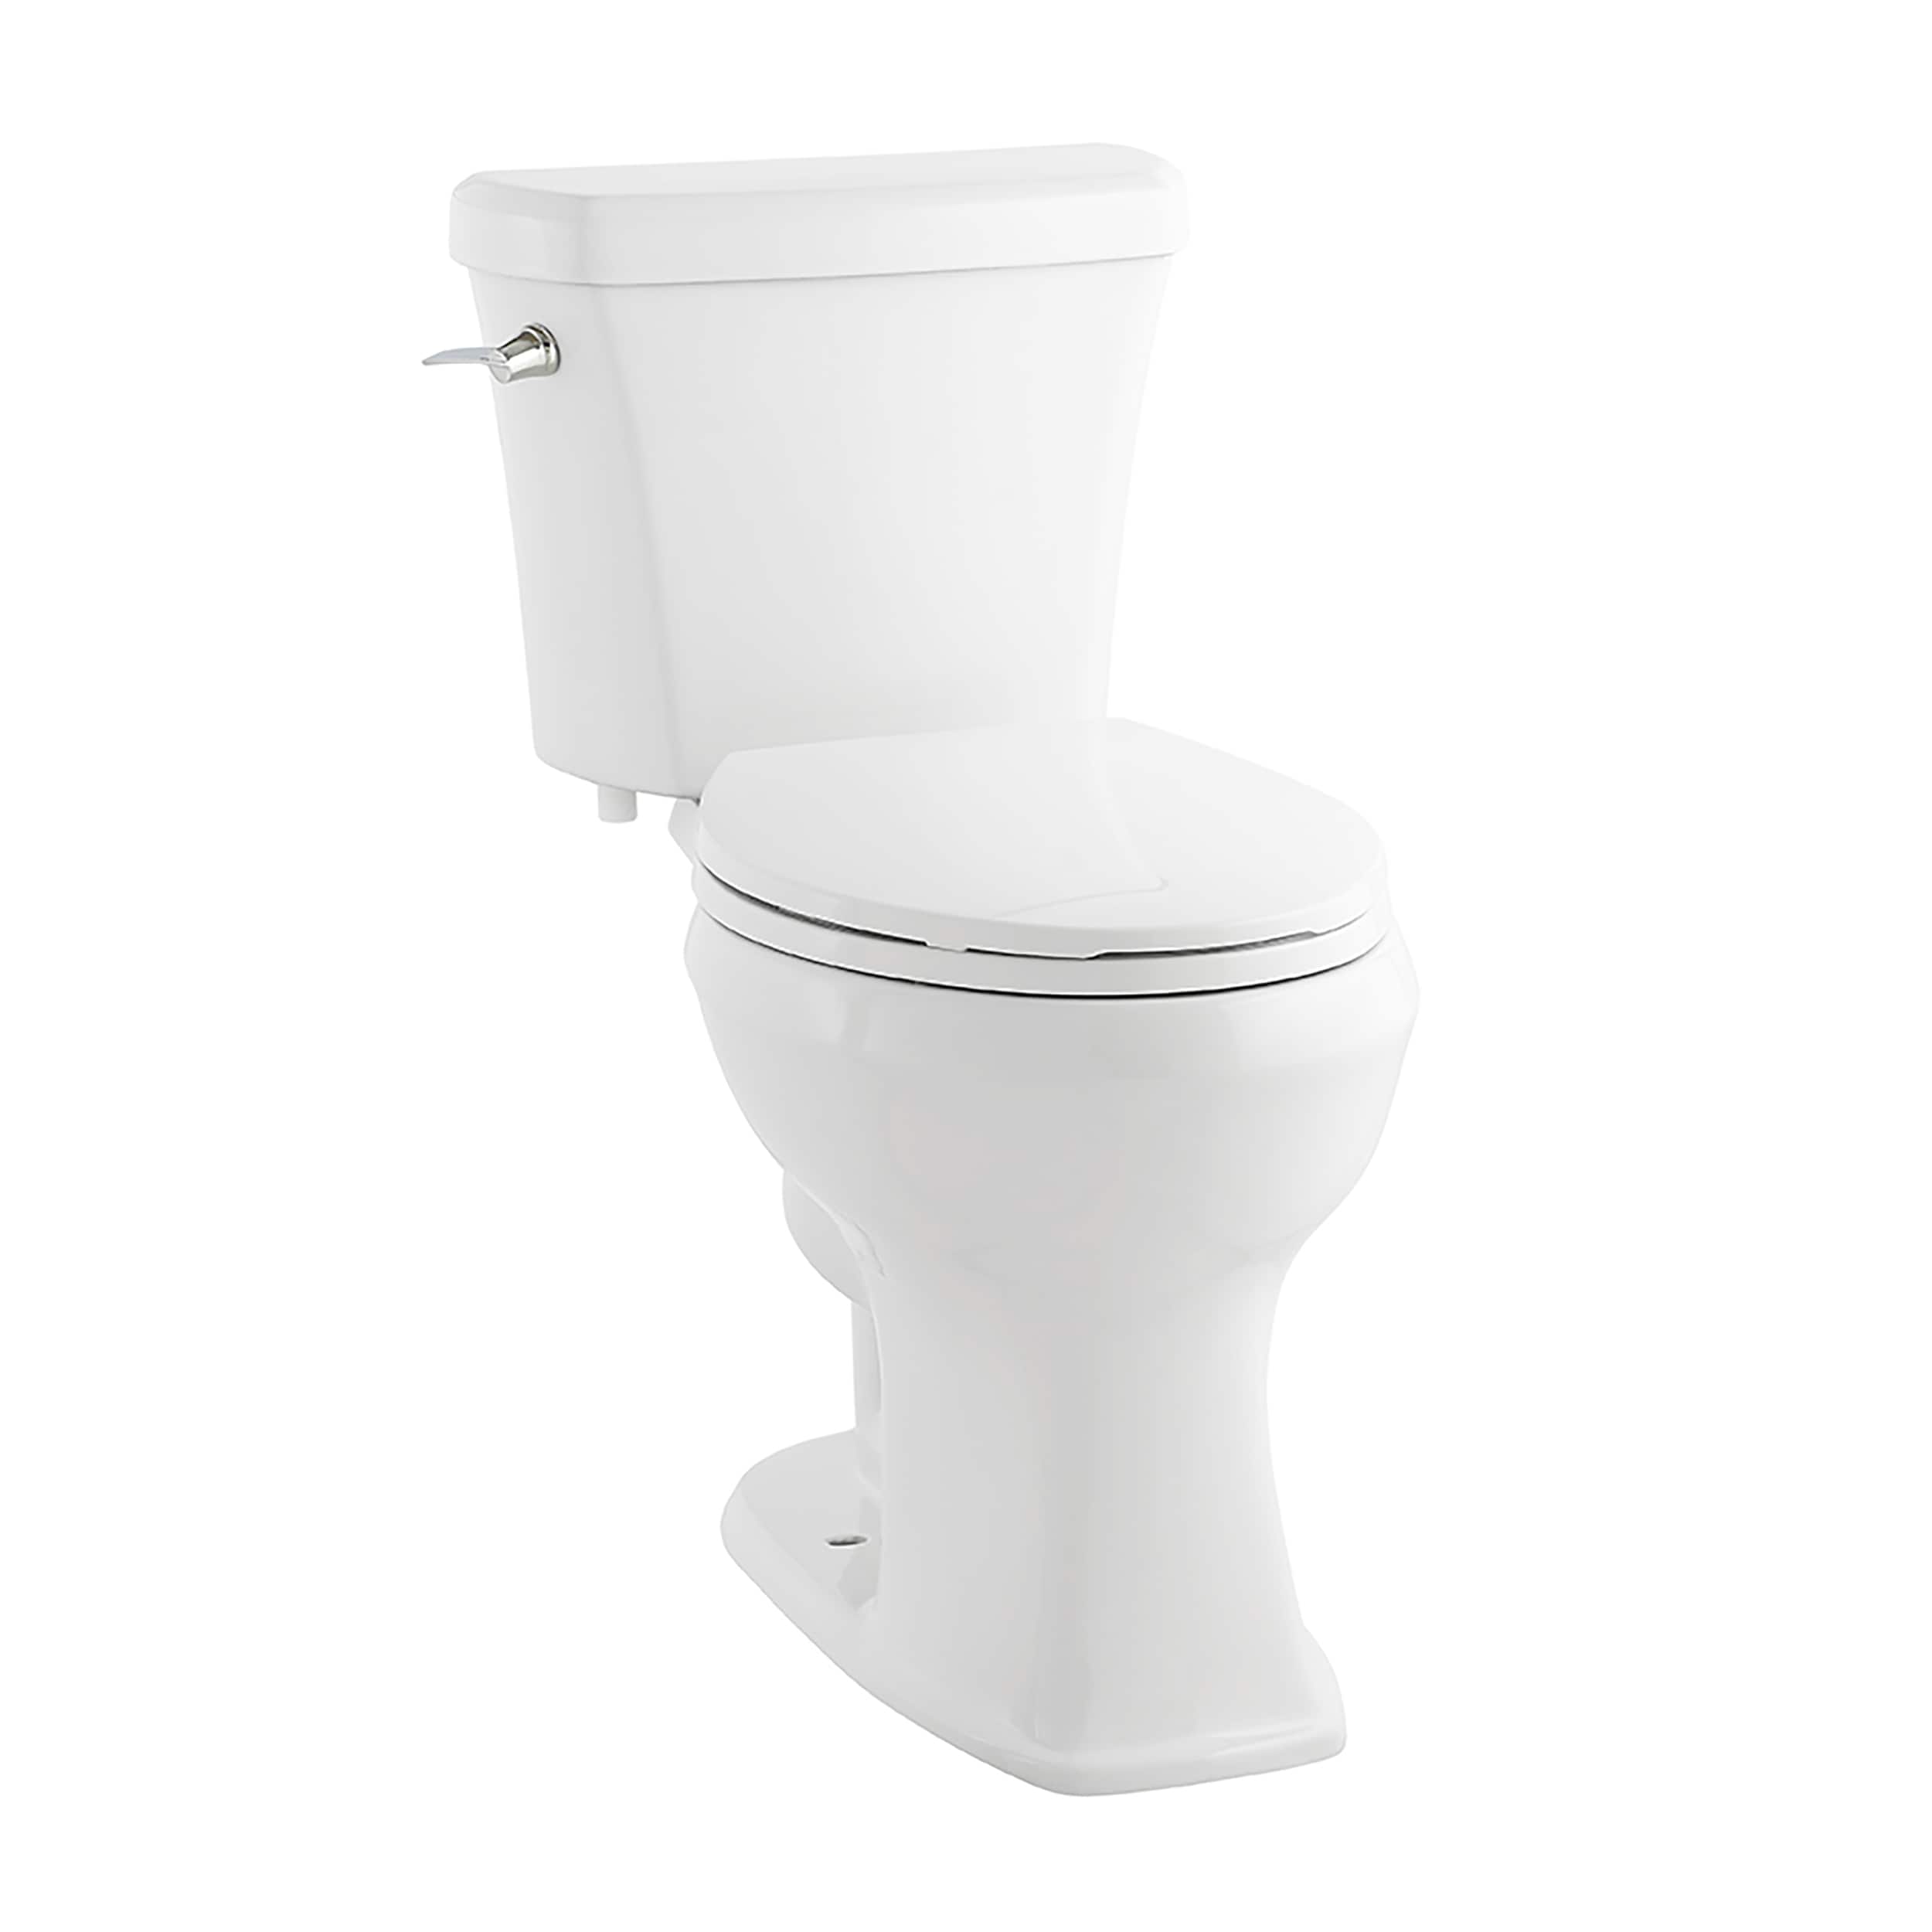 Toilet Buying Guide - Handy Man Home Remodeling Center